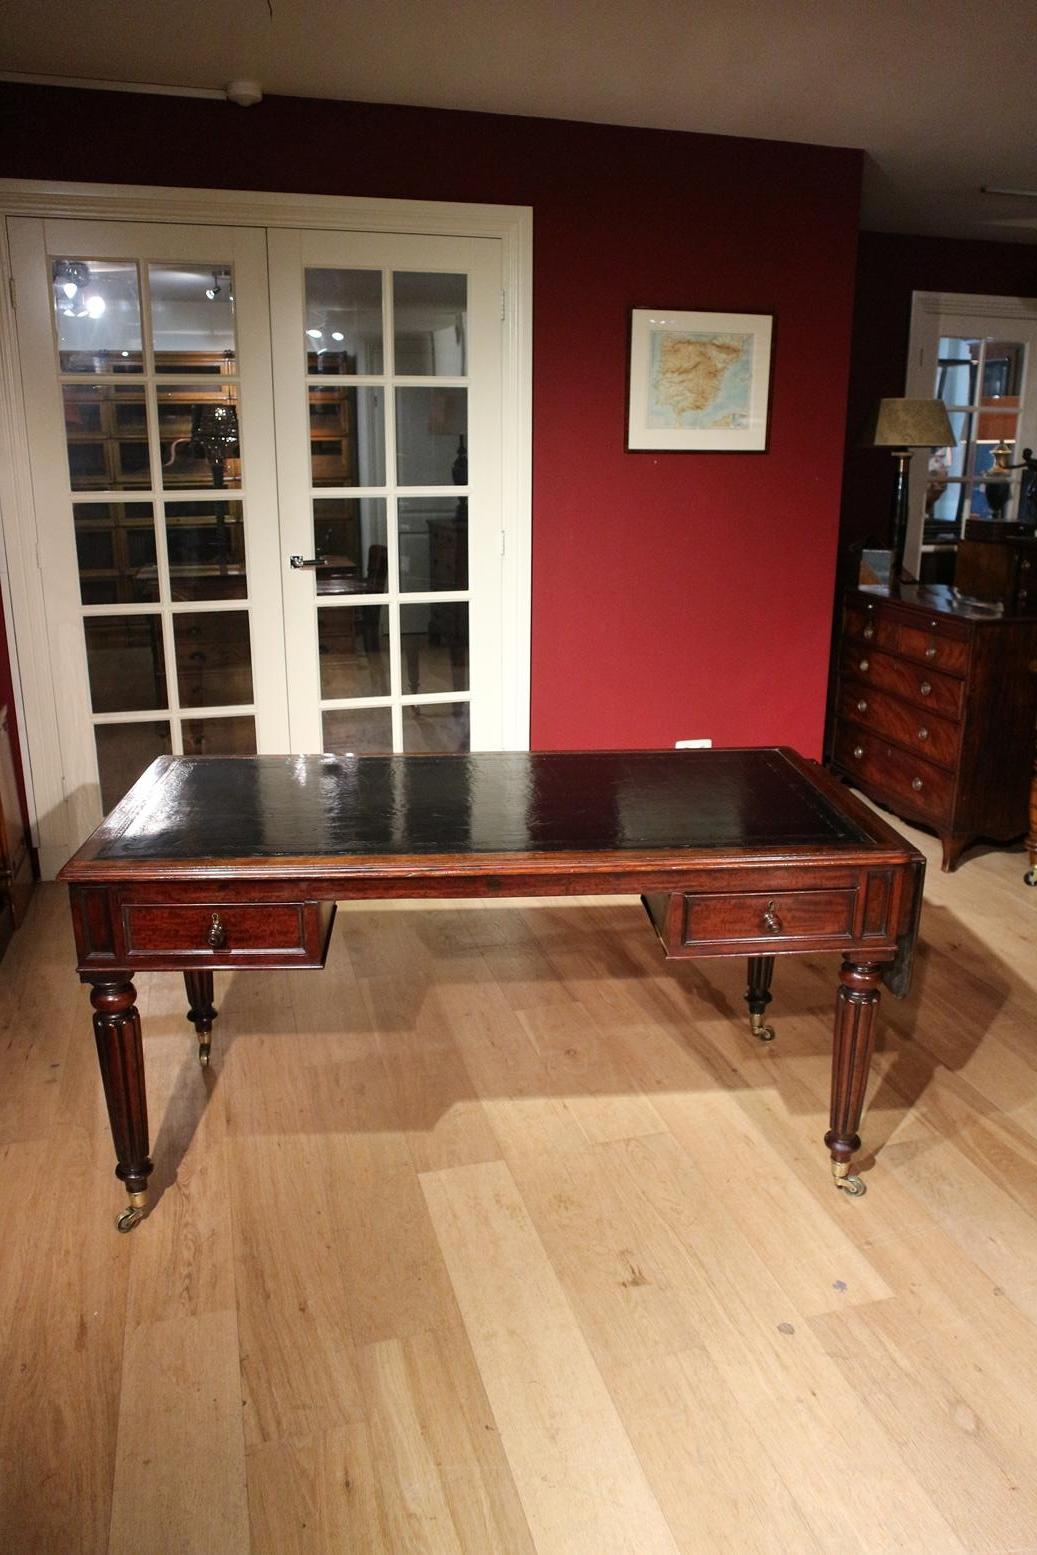 Early 19th century antique mahogany writing table. In very good condition. The table has as a special feature a fold-out leaf on the right. Very good quality table. The table has a stylish leg with branded brass wheels. The black leather top has